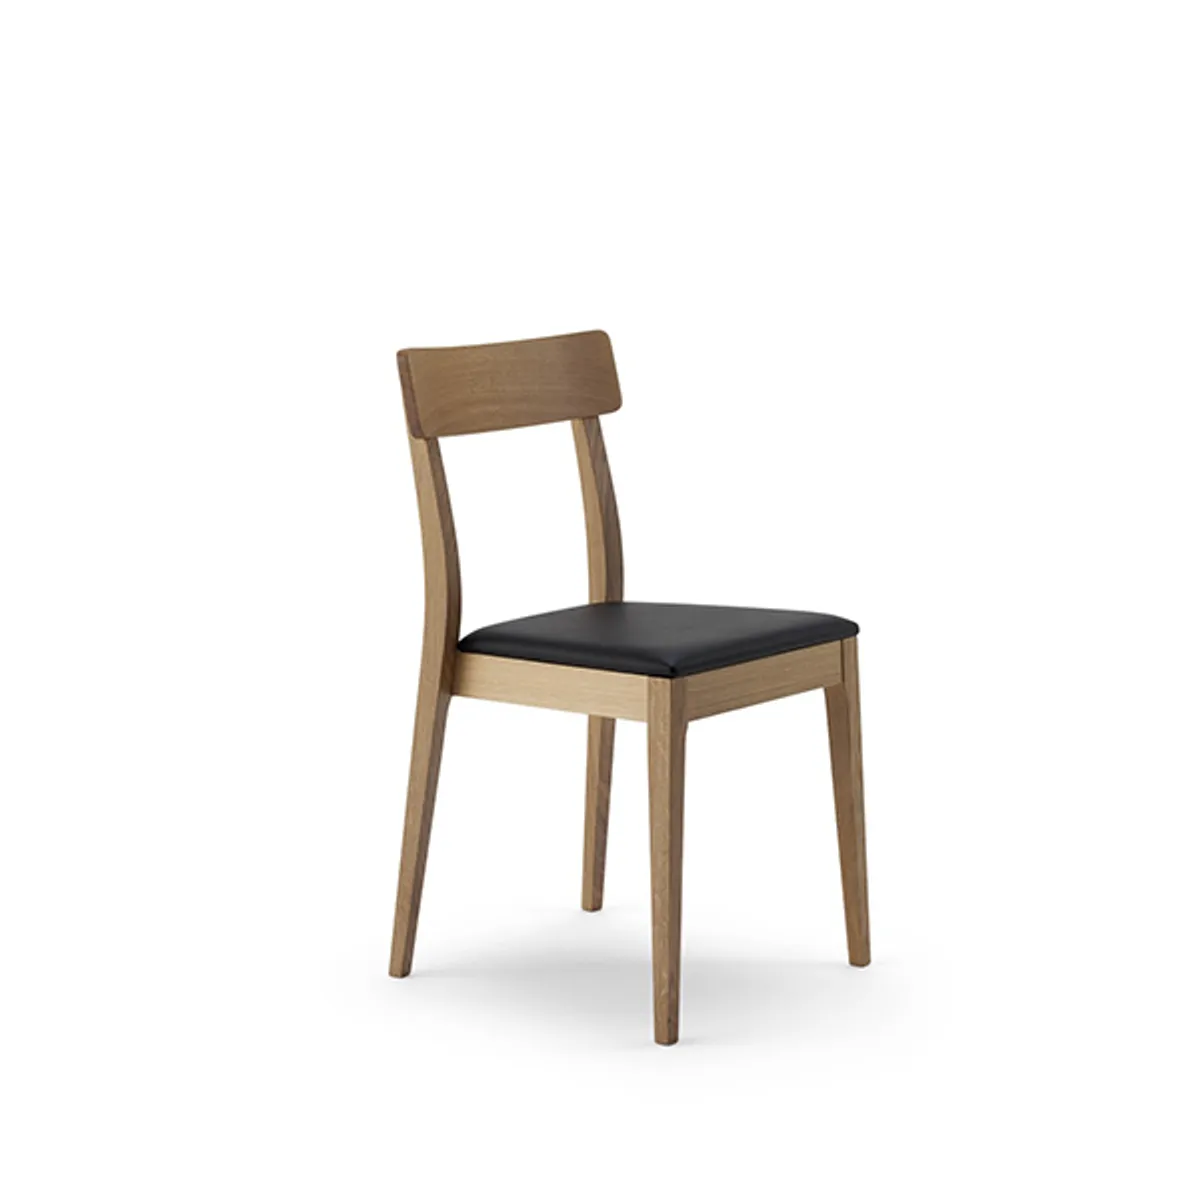 Tupi Side Chair Leather Seat Inside Out Contracts